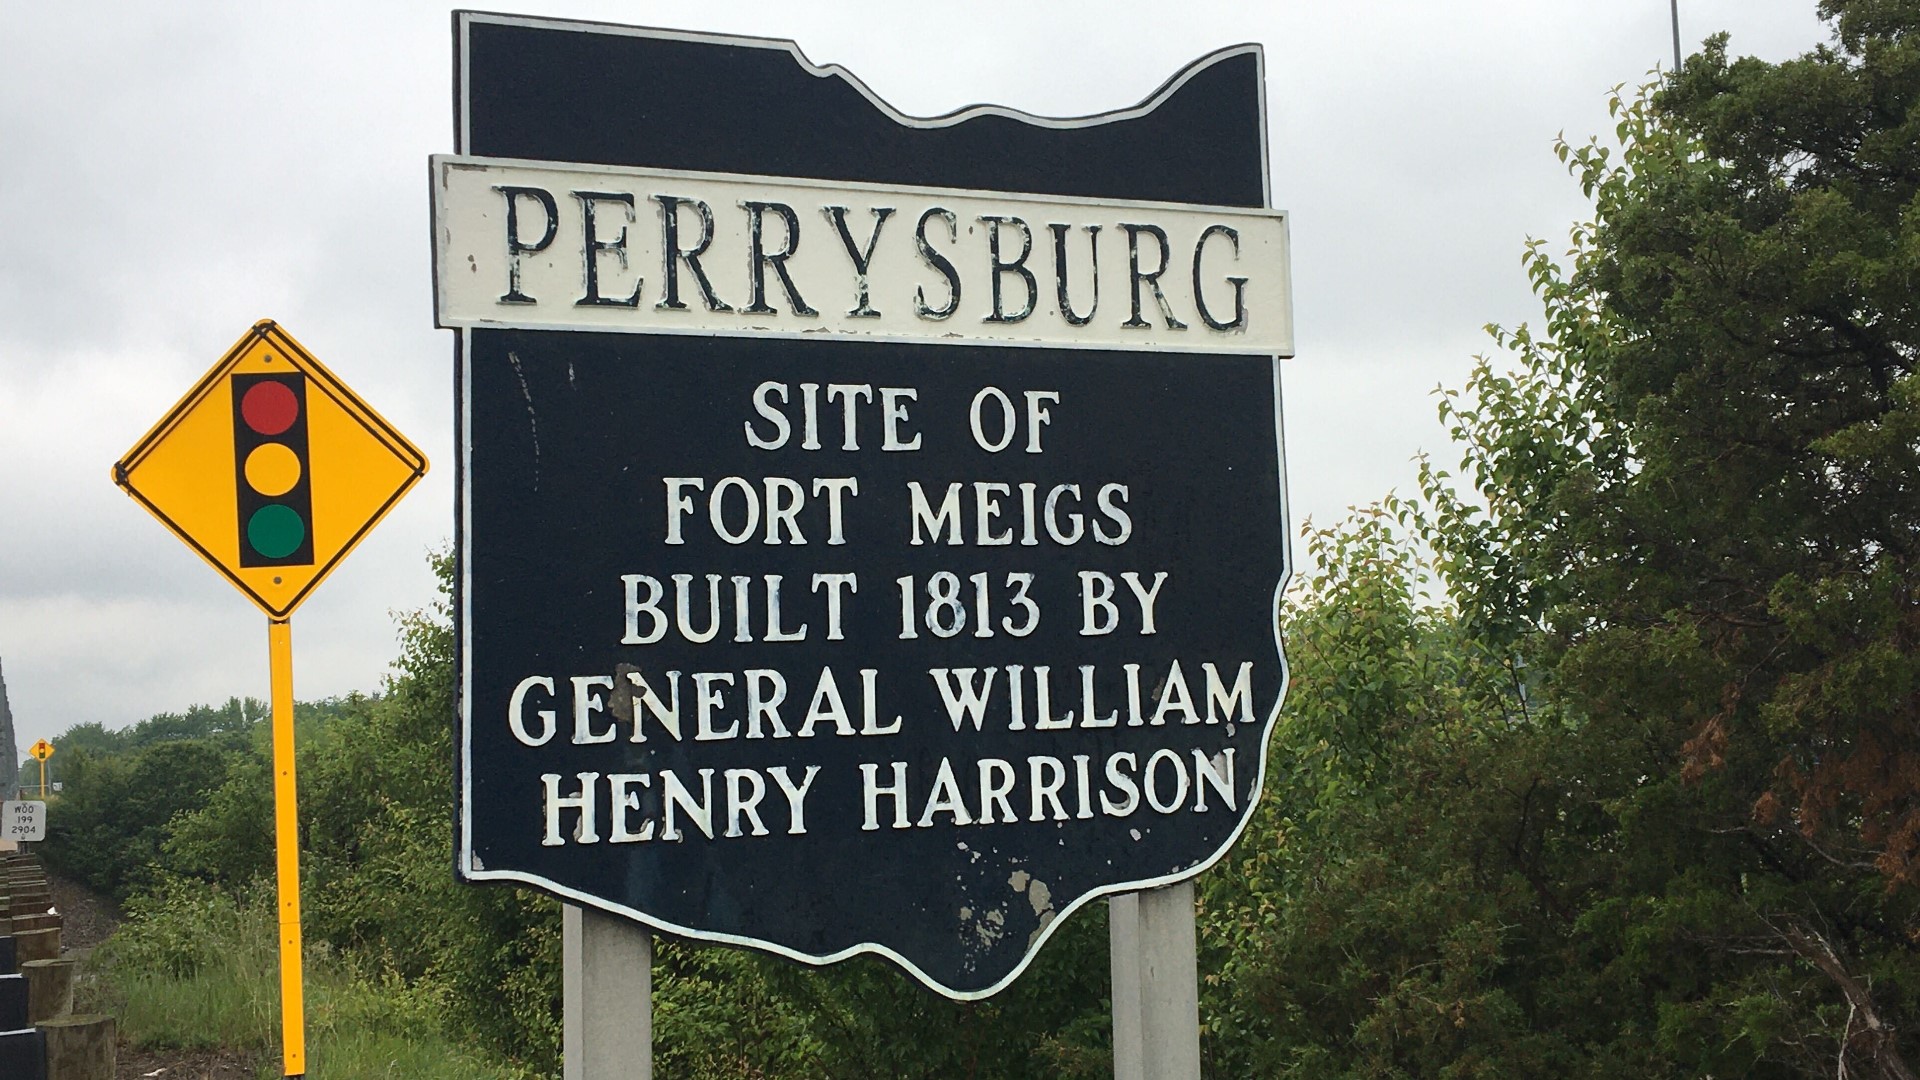 The chamber of commerce's research showed William Henry Harrison was a slave owner; event now known as Positively Perrysburg Fest.